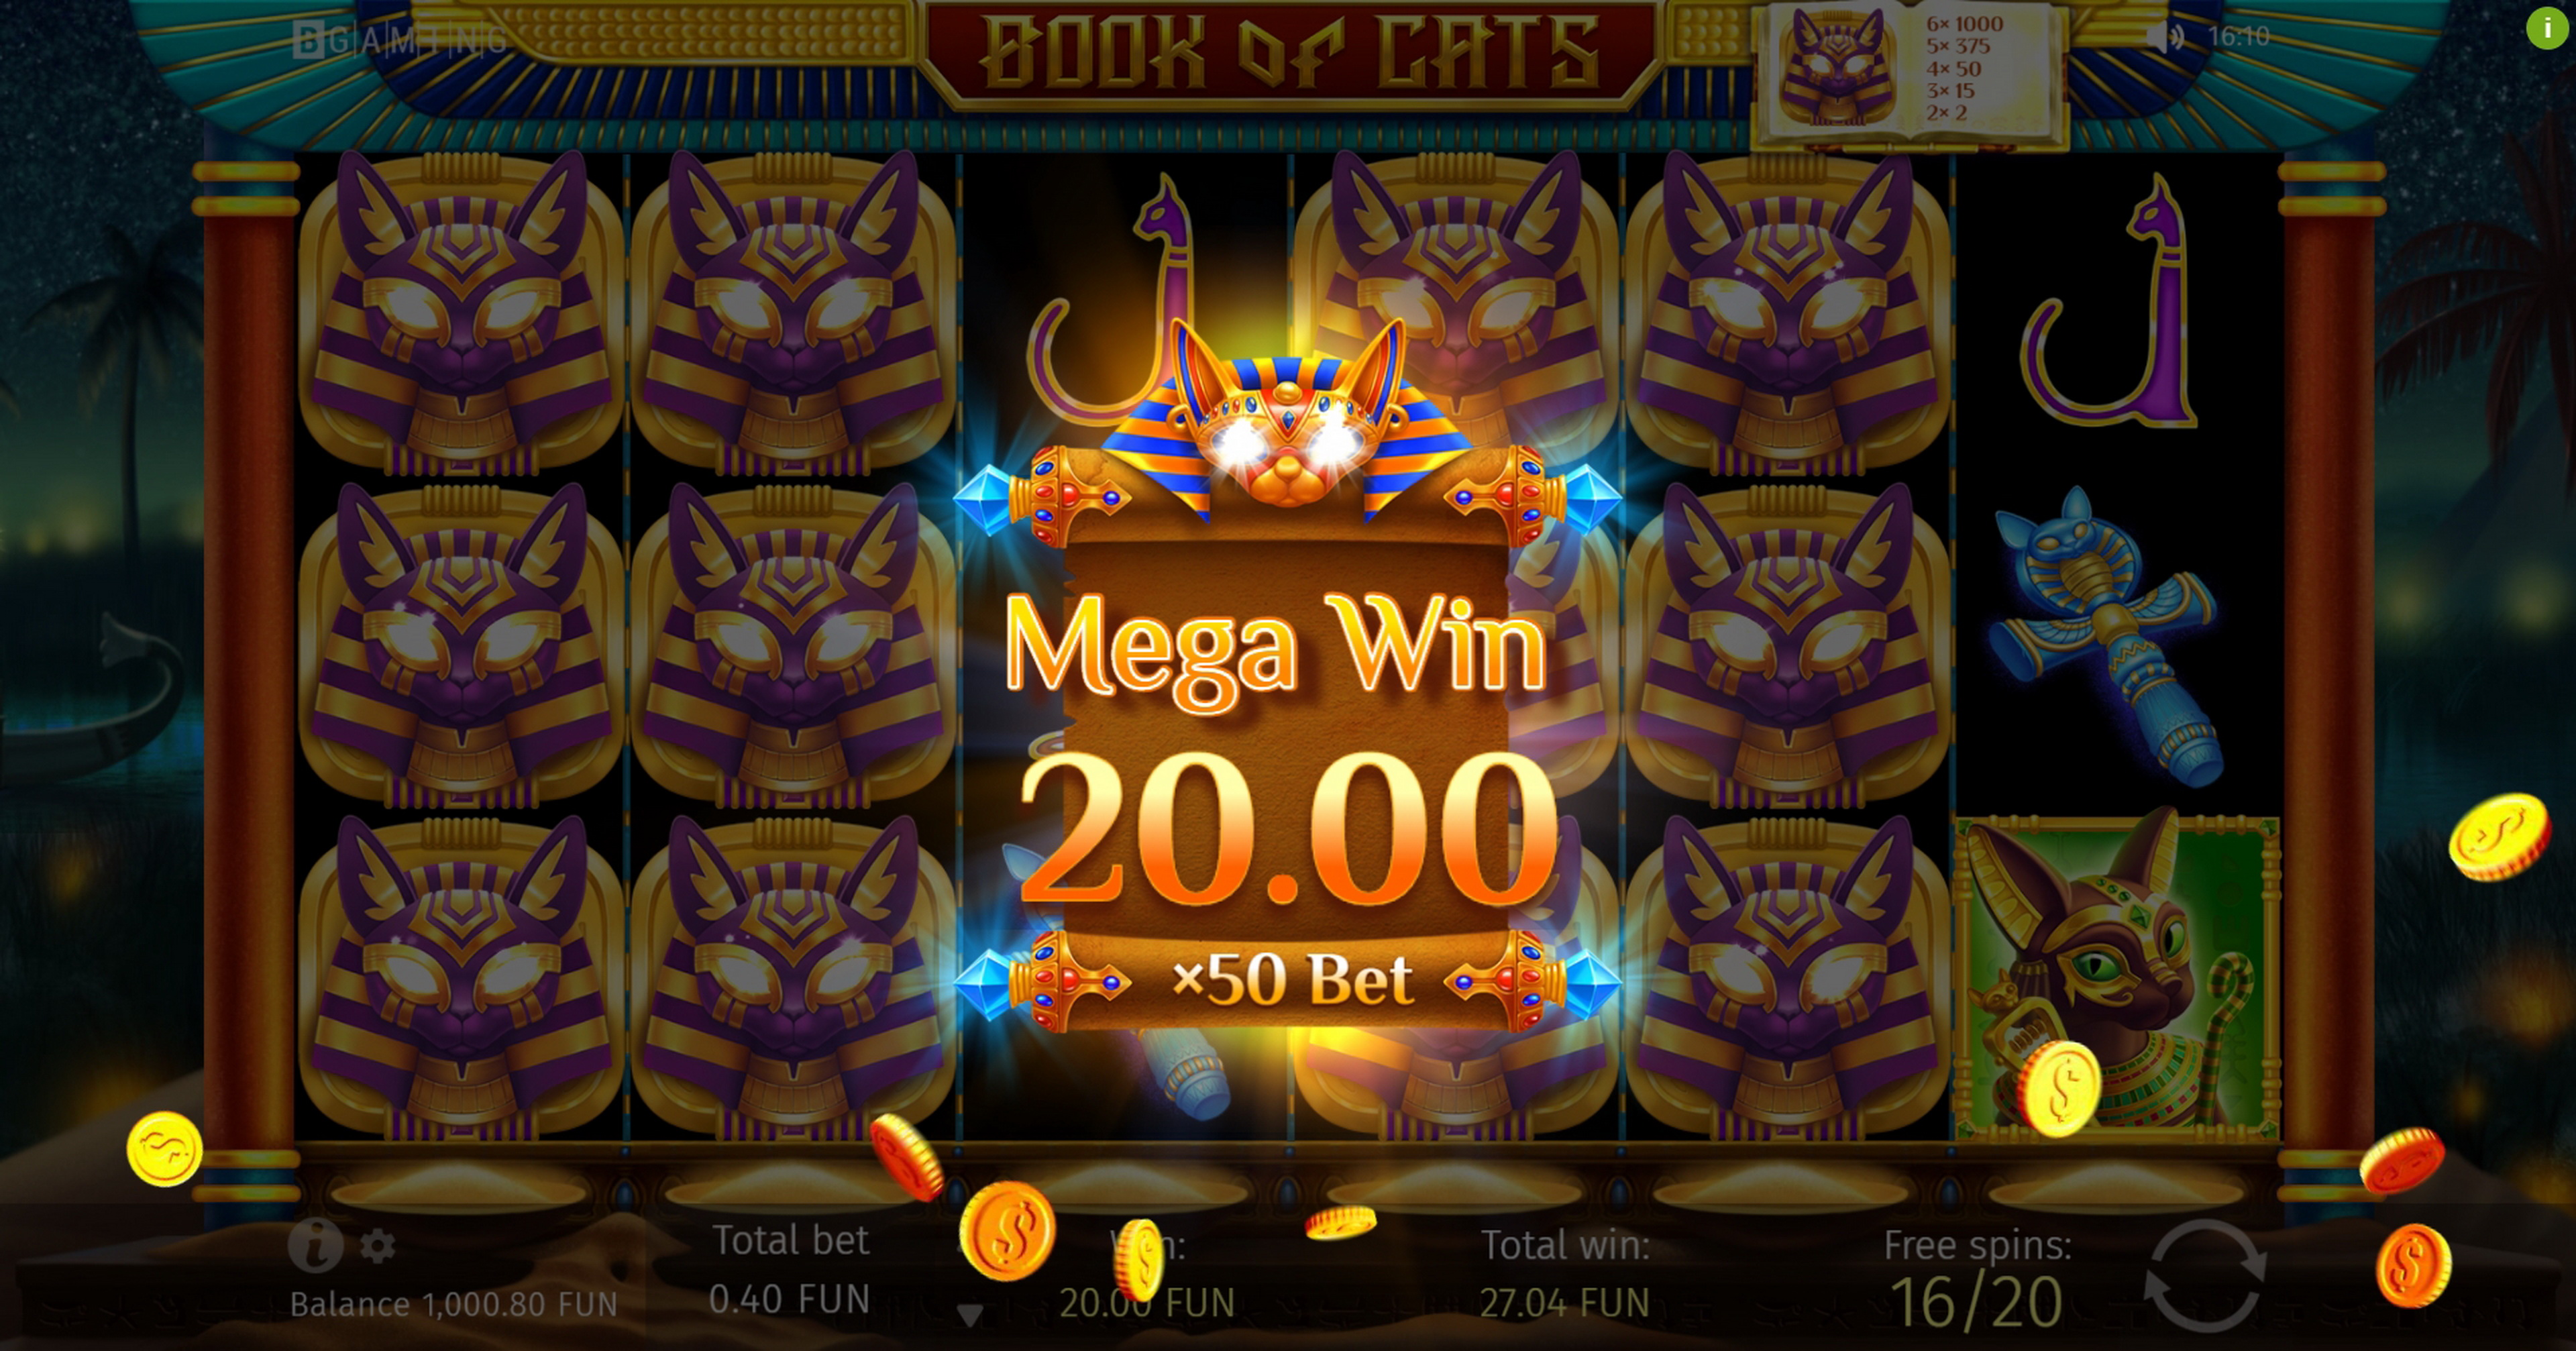 Win Money in Book Of Cats Free Slot Game by BGAMING